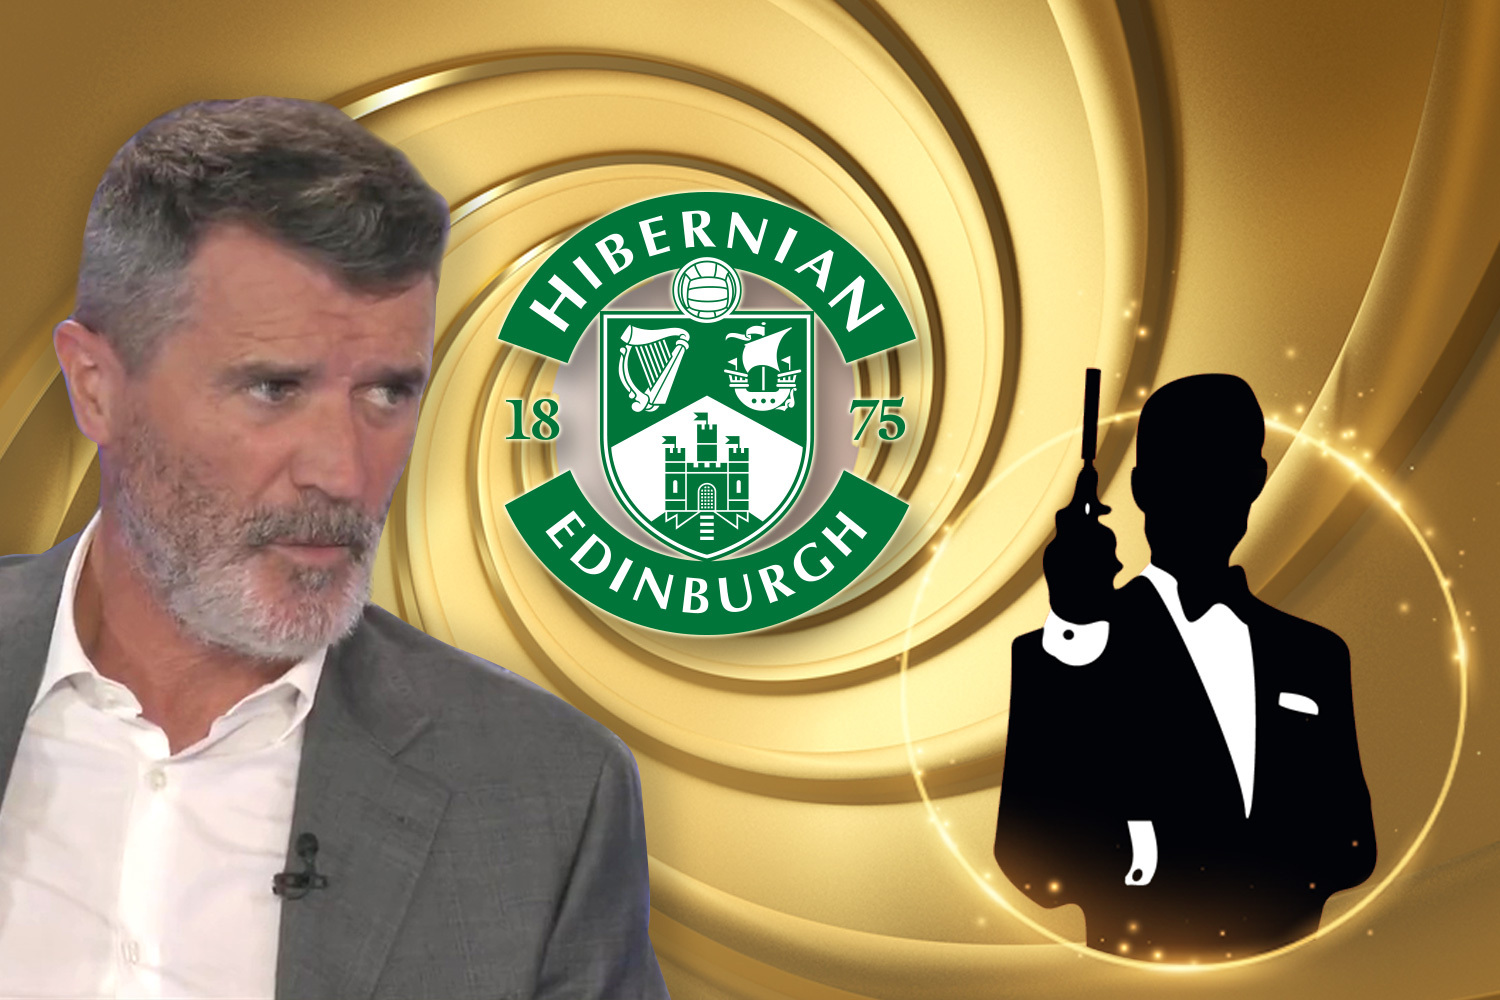 Roy Keane 6/4 favourite to be next Hibs manager... or 500/1 for next James Bond